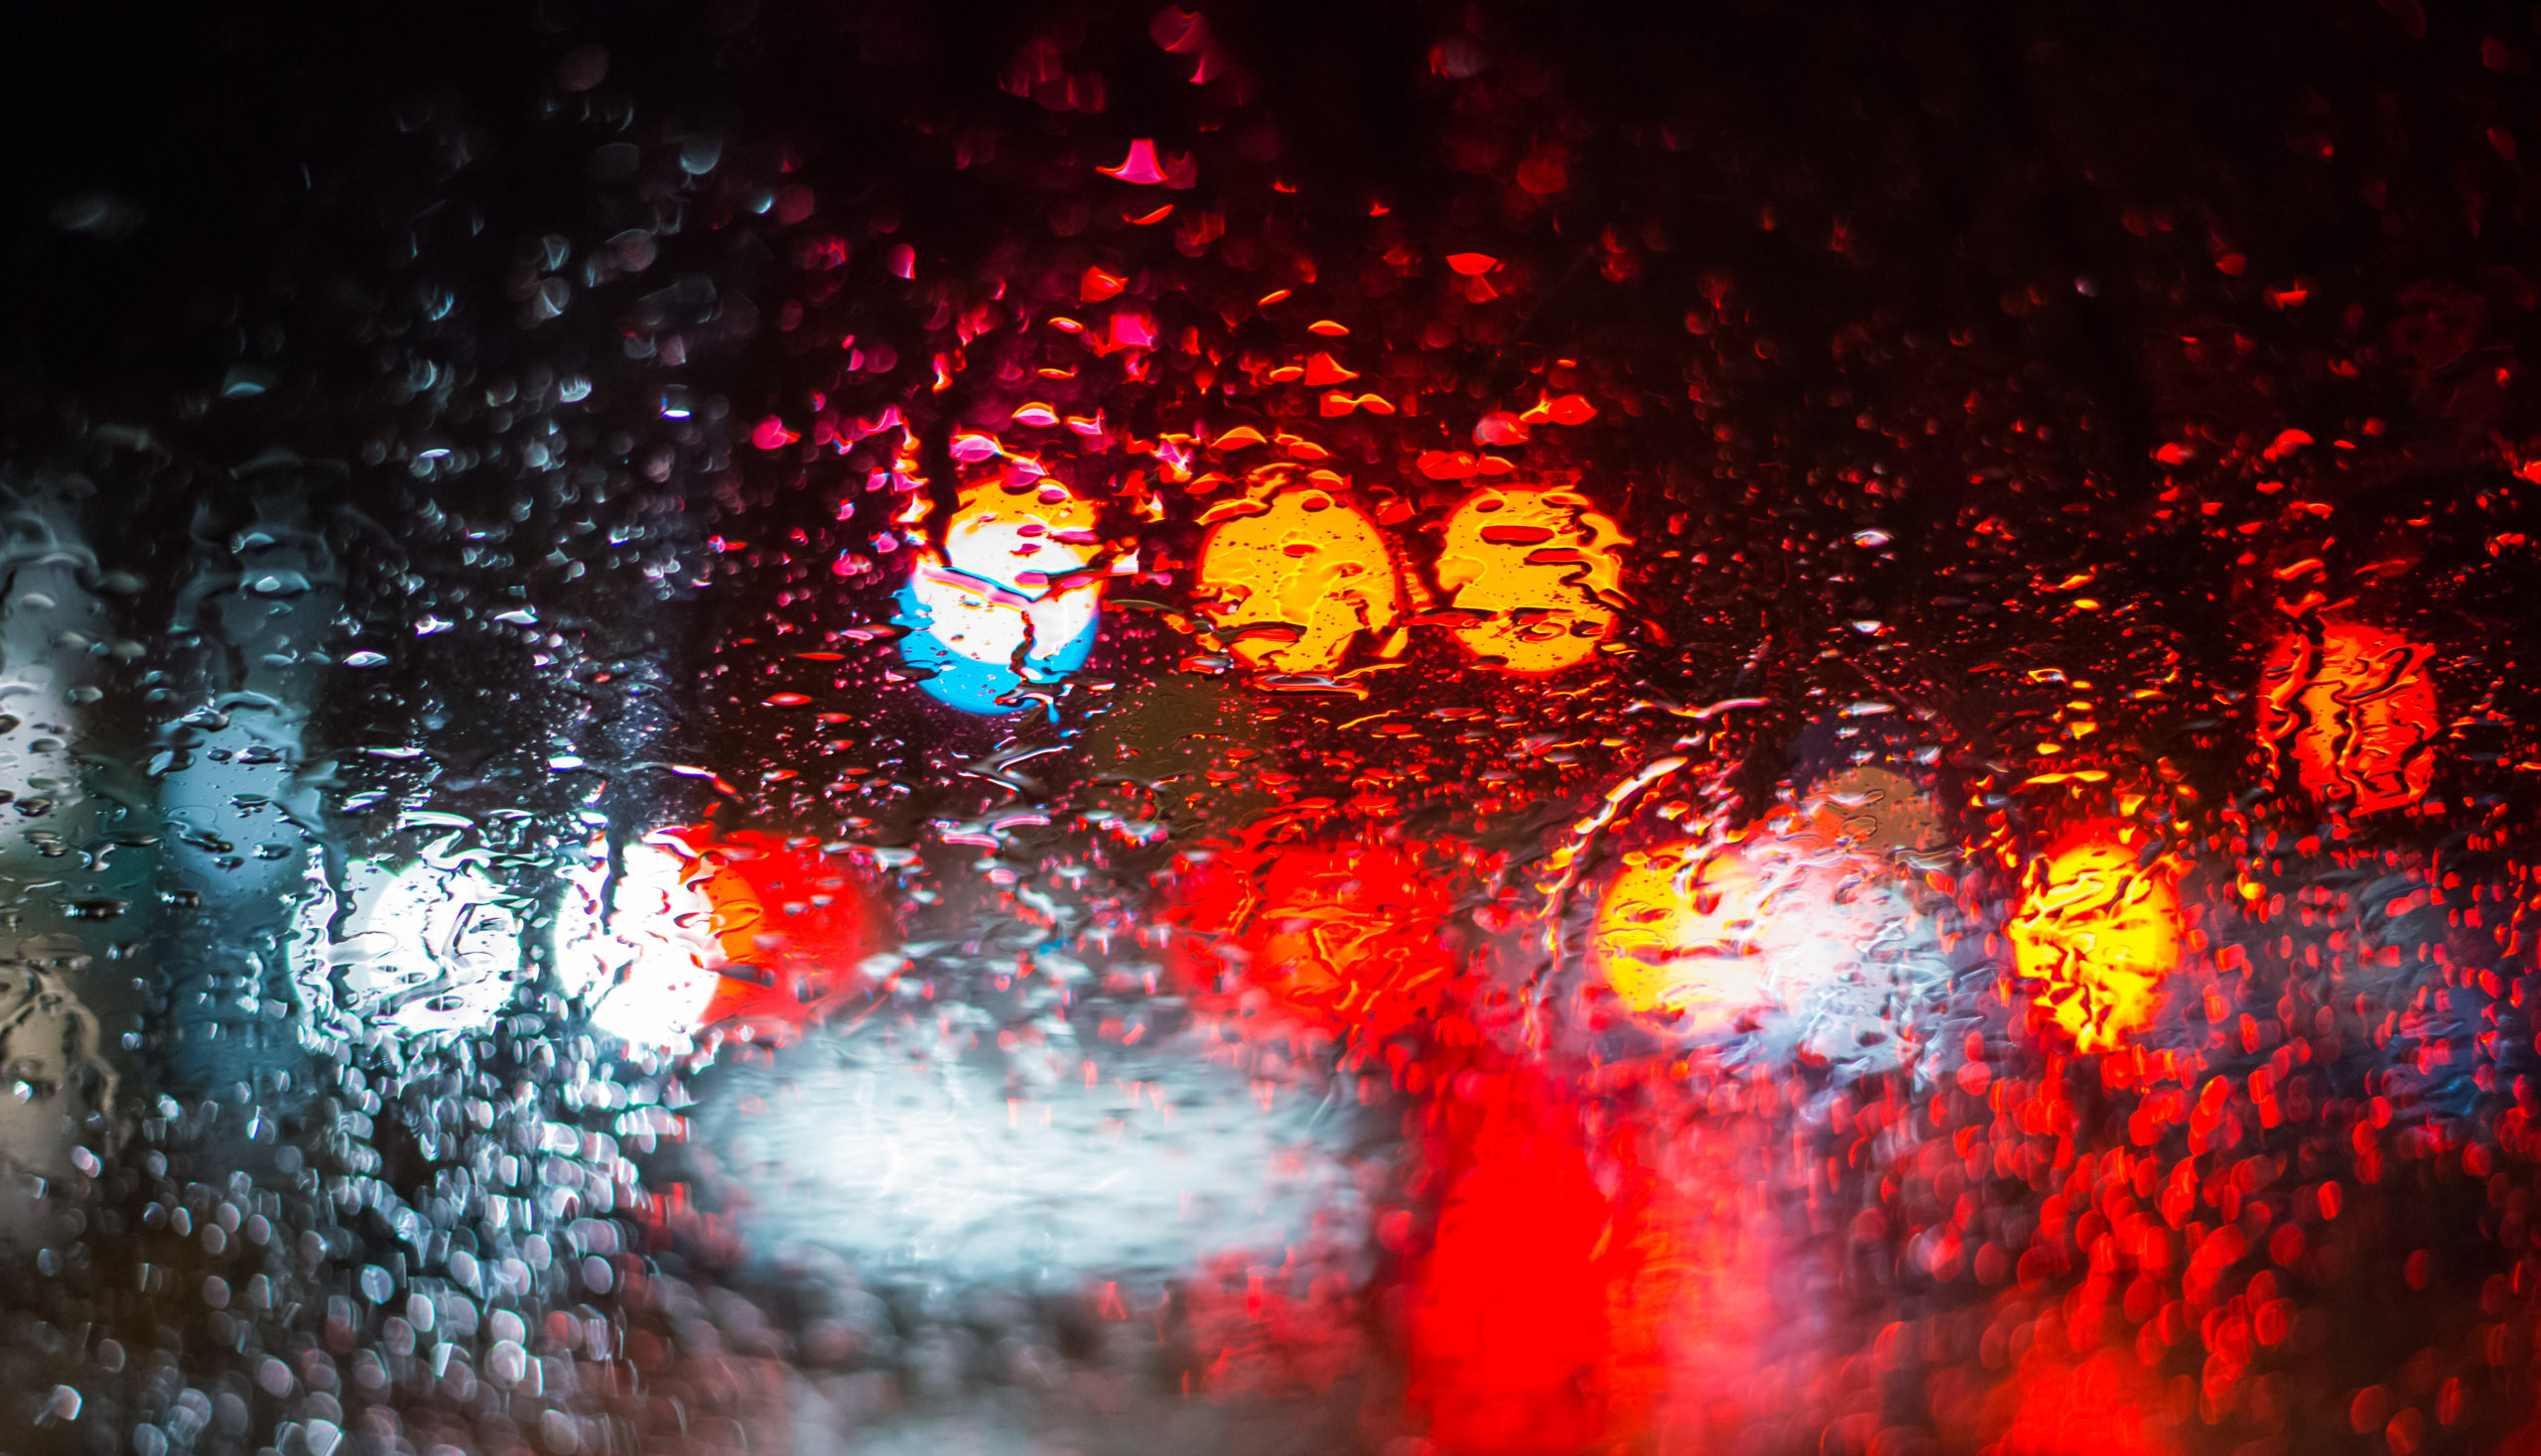 https://autolab.com.co/wp-content/uploads/abstract-car-lights-from-a-rainy-car-window-2023-11-27-05-01-29-utc-scaled.jpg